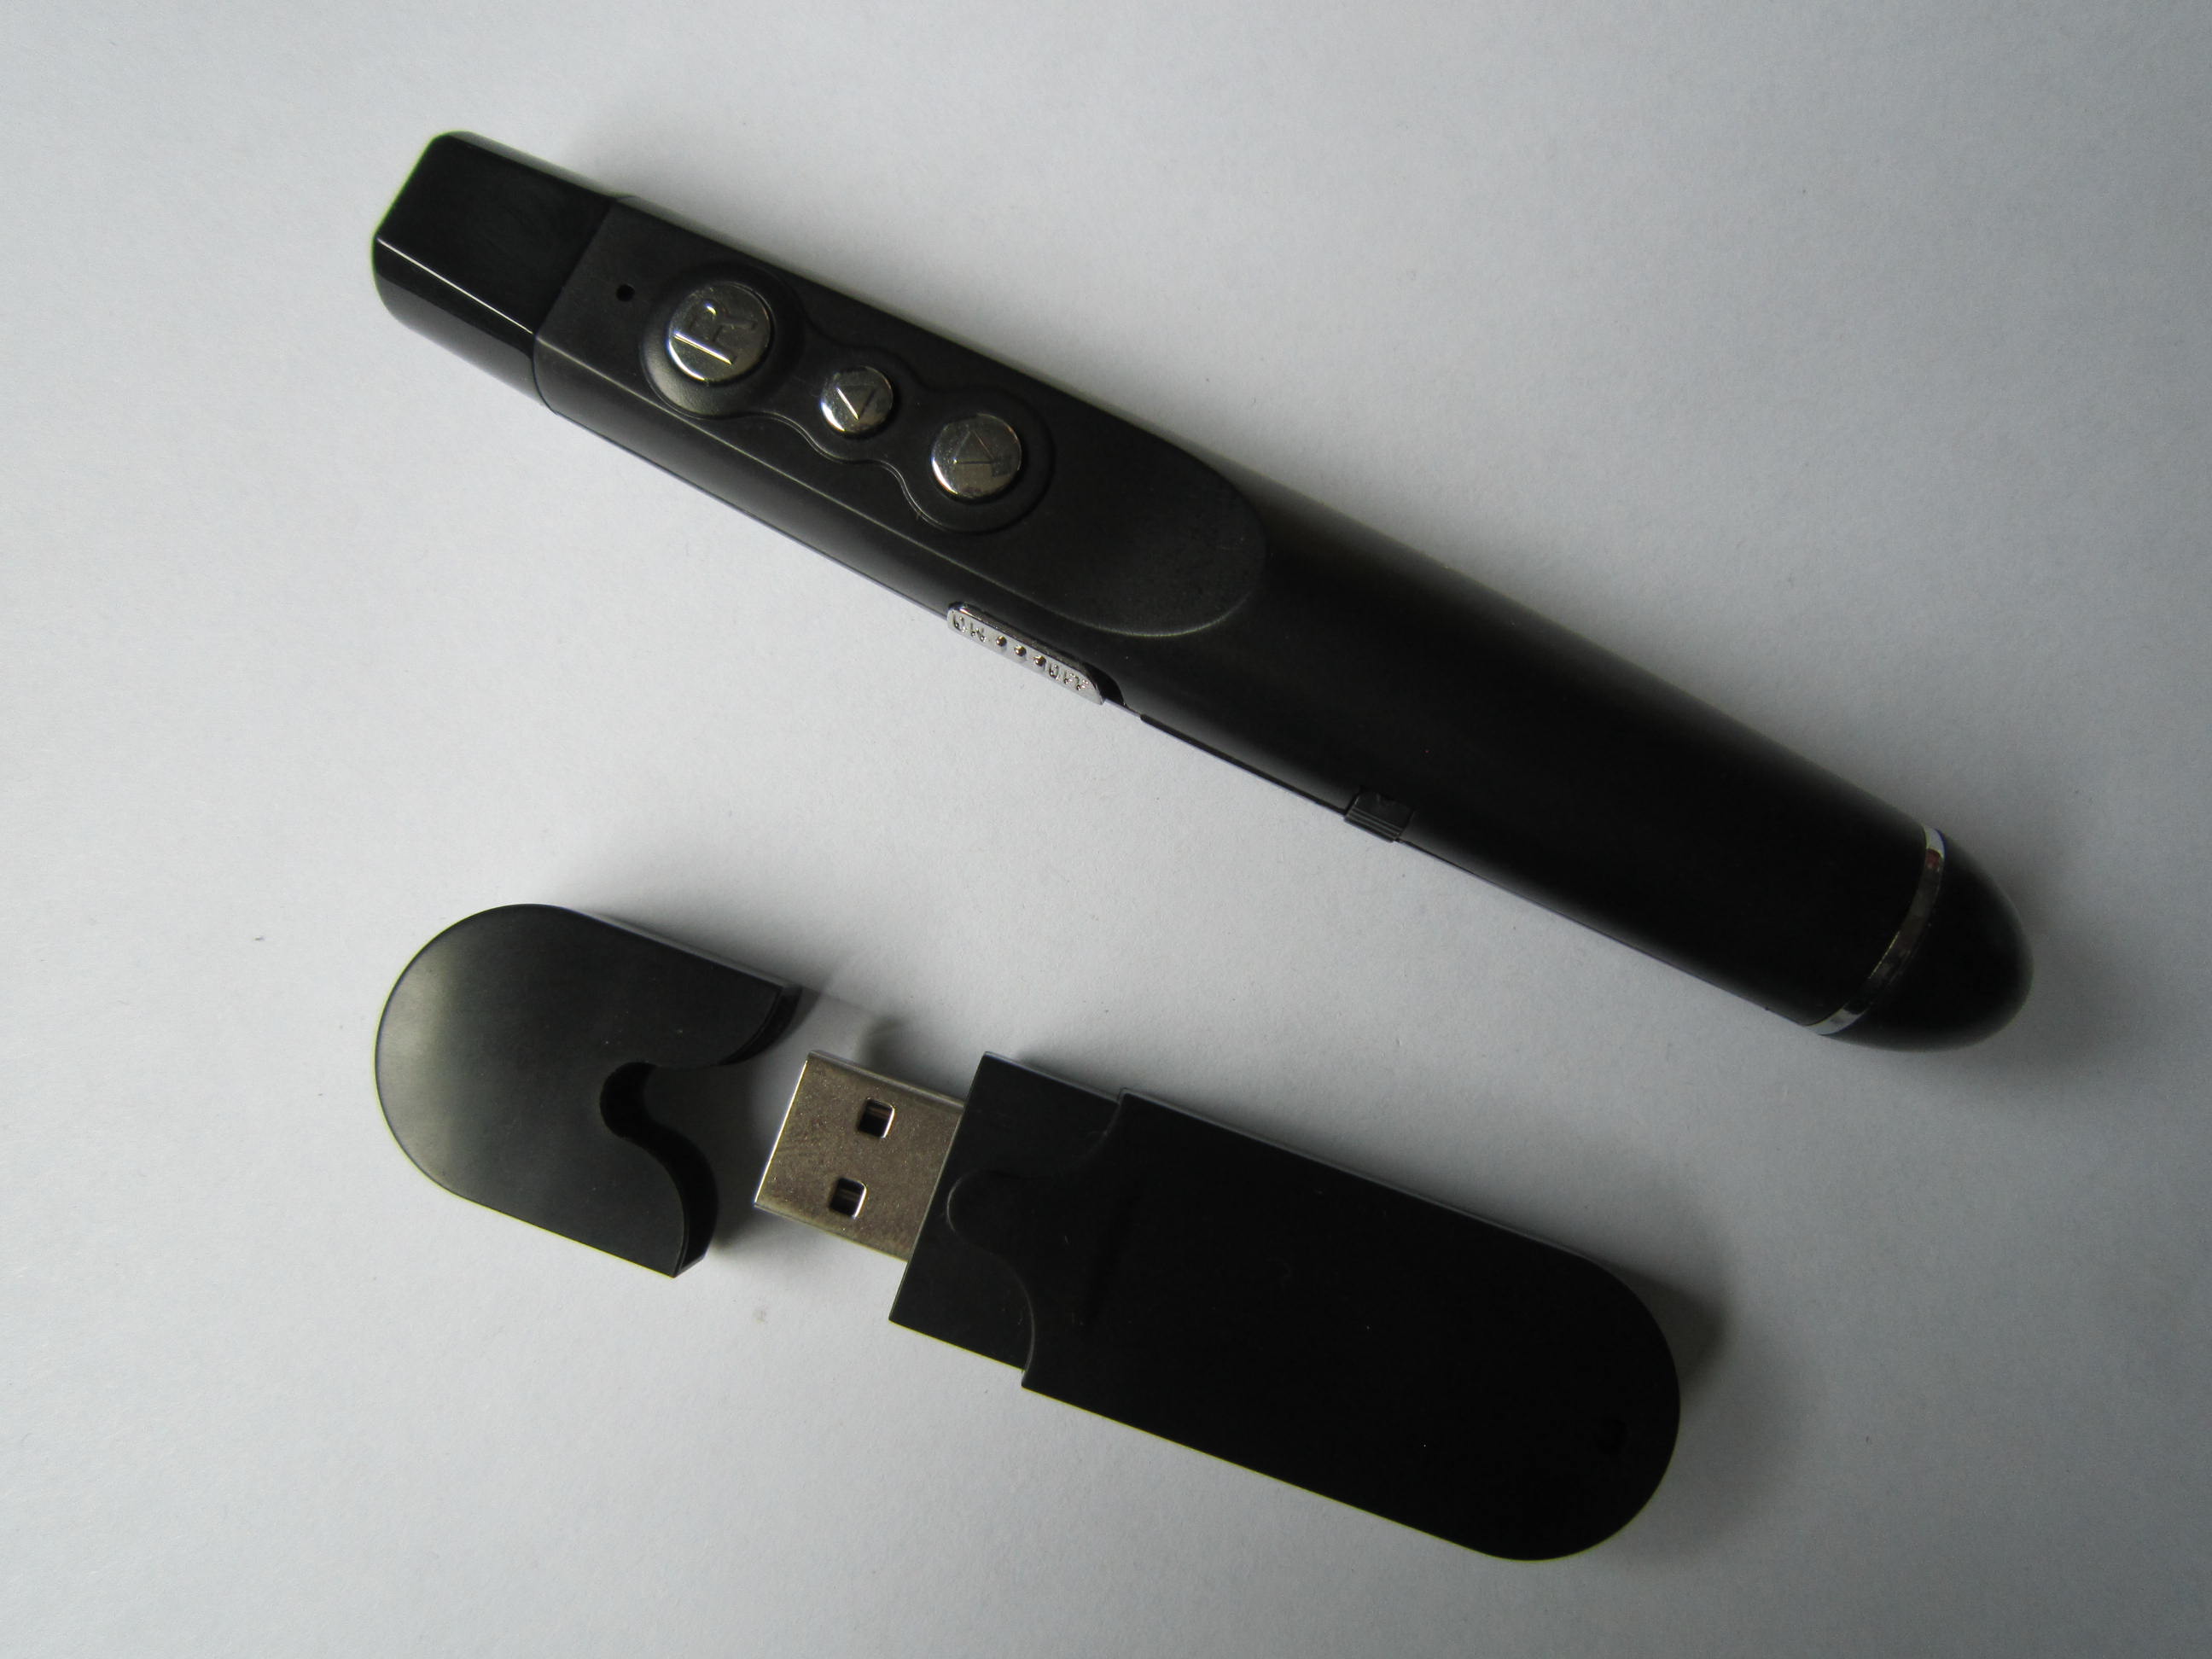 HDW-RS016A Wireless presenter with laser pointer